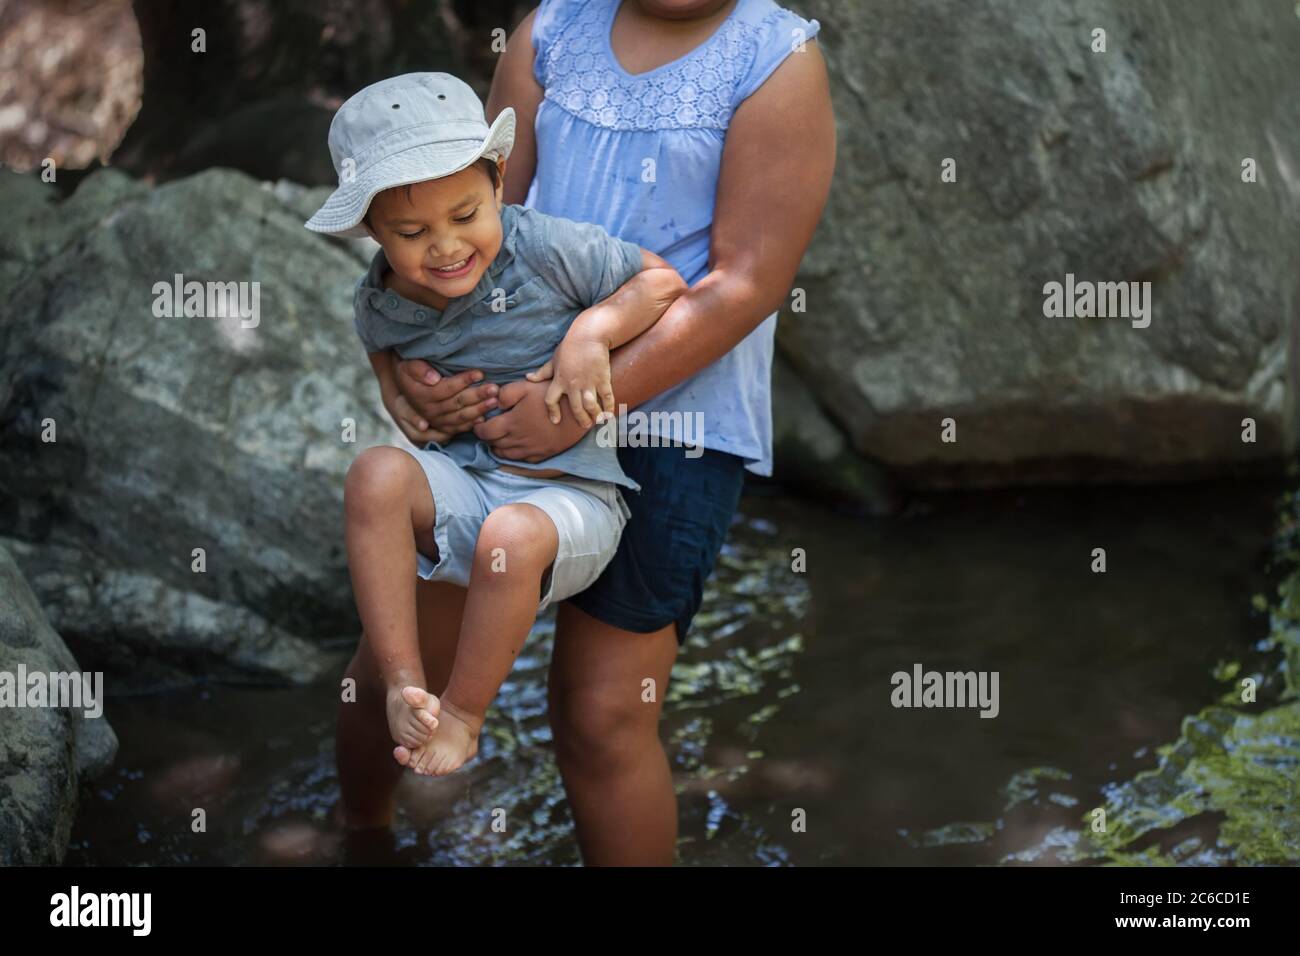 Big sister holding her little brother above the cold water from a pond while he is nervous. Stock Photo